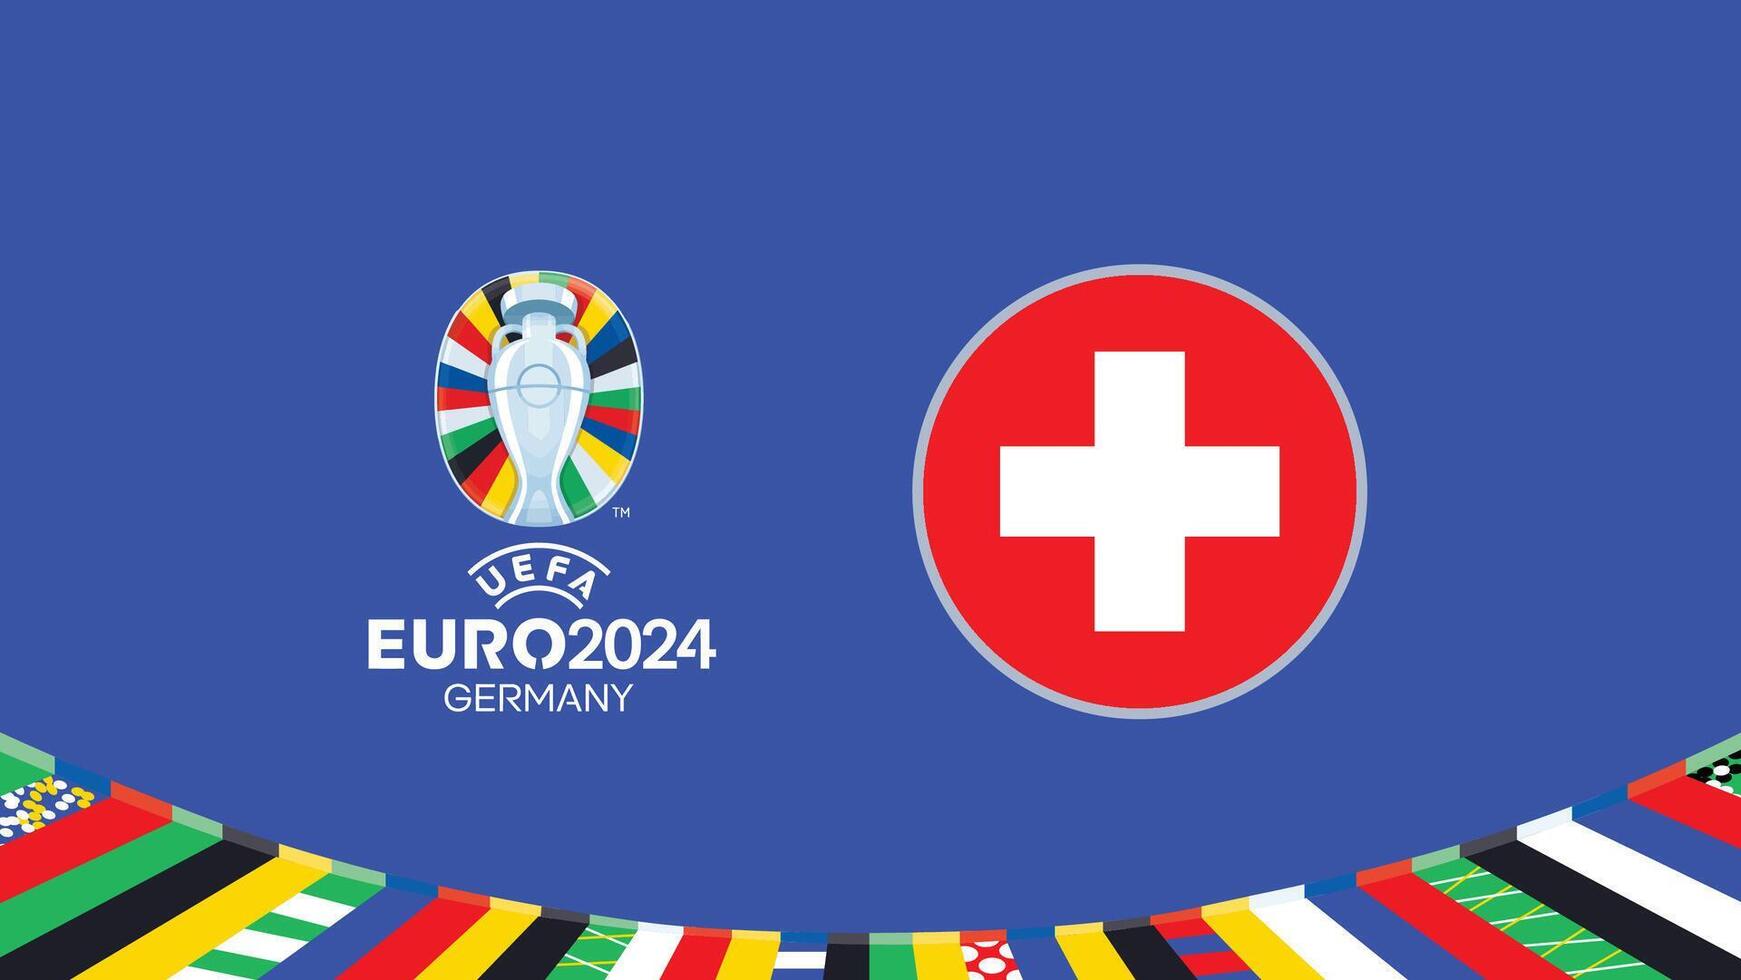 Euro 2024 Germany Switzerland Flag Teams Design With Official Symbol Logo Abstract Countries European Football Illustration vector